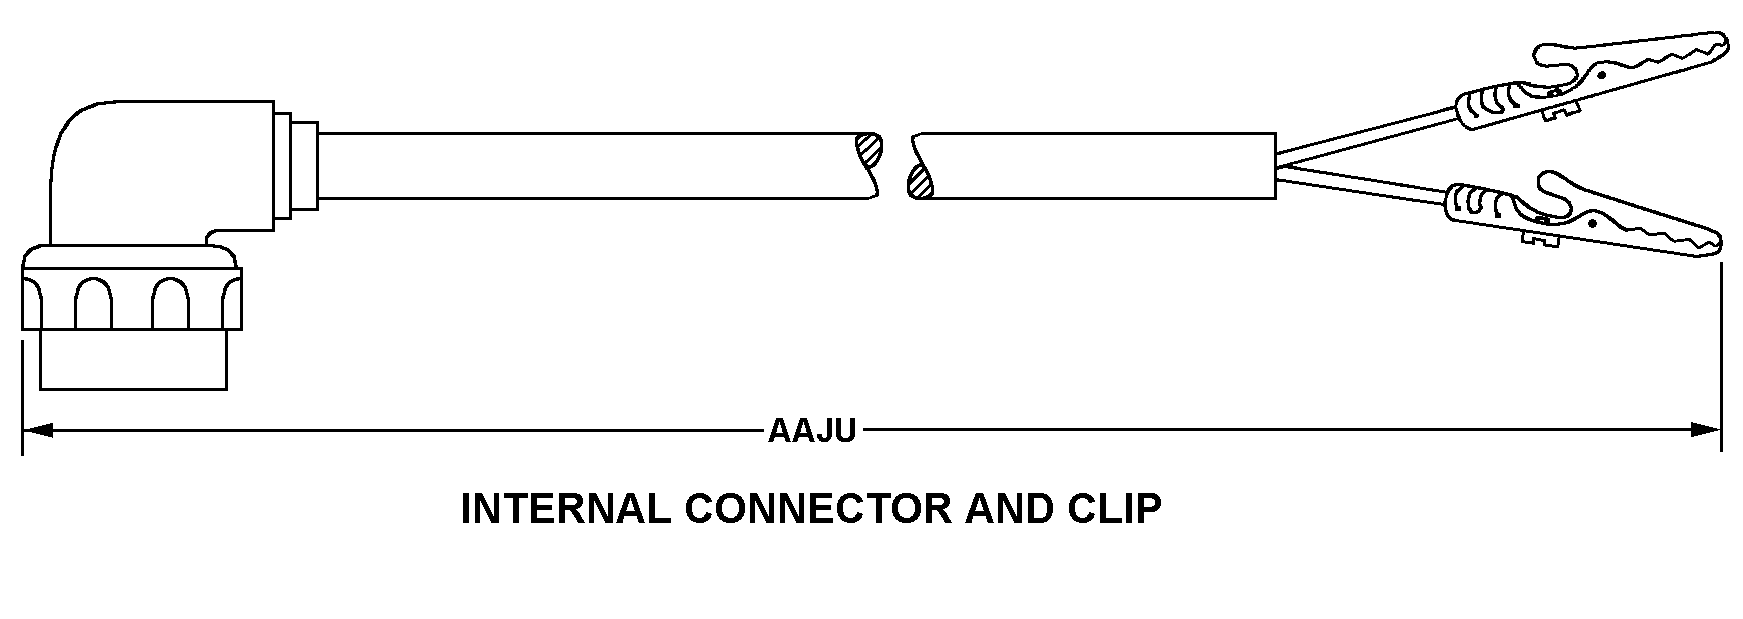 INTERNAL CONNECTOR AND CLIP style nsn 5995-00-945-1882